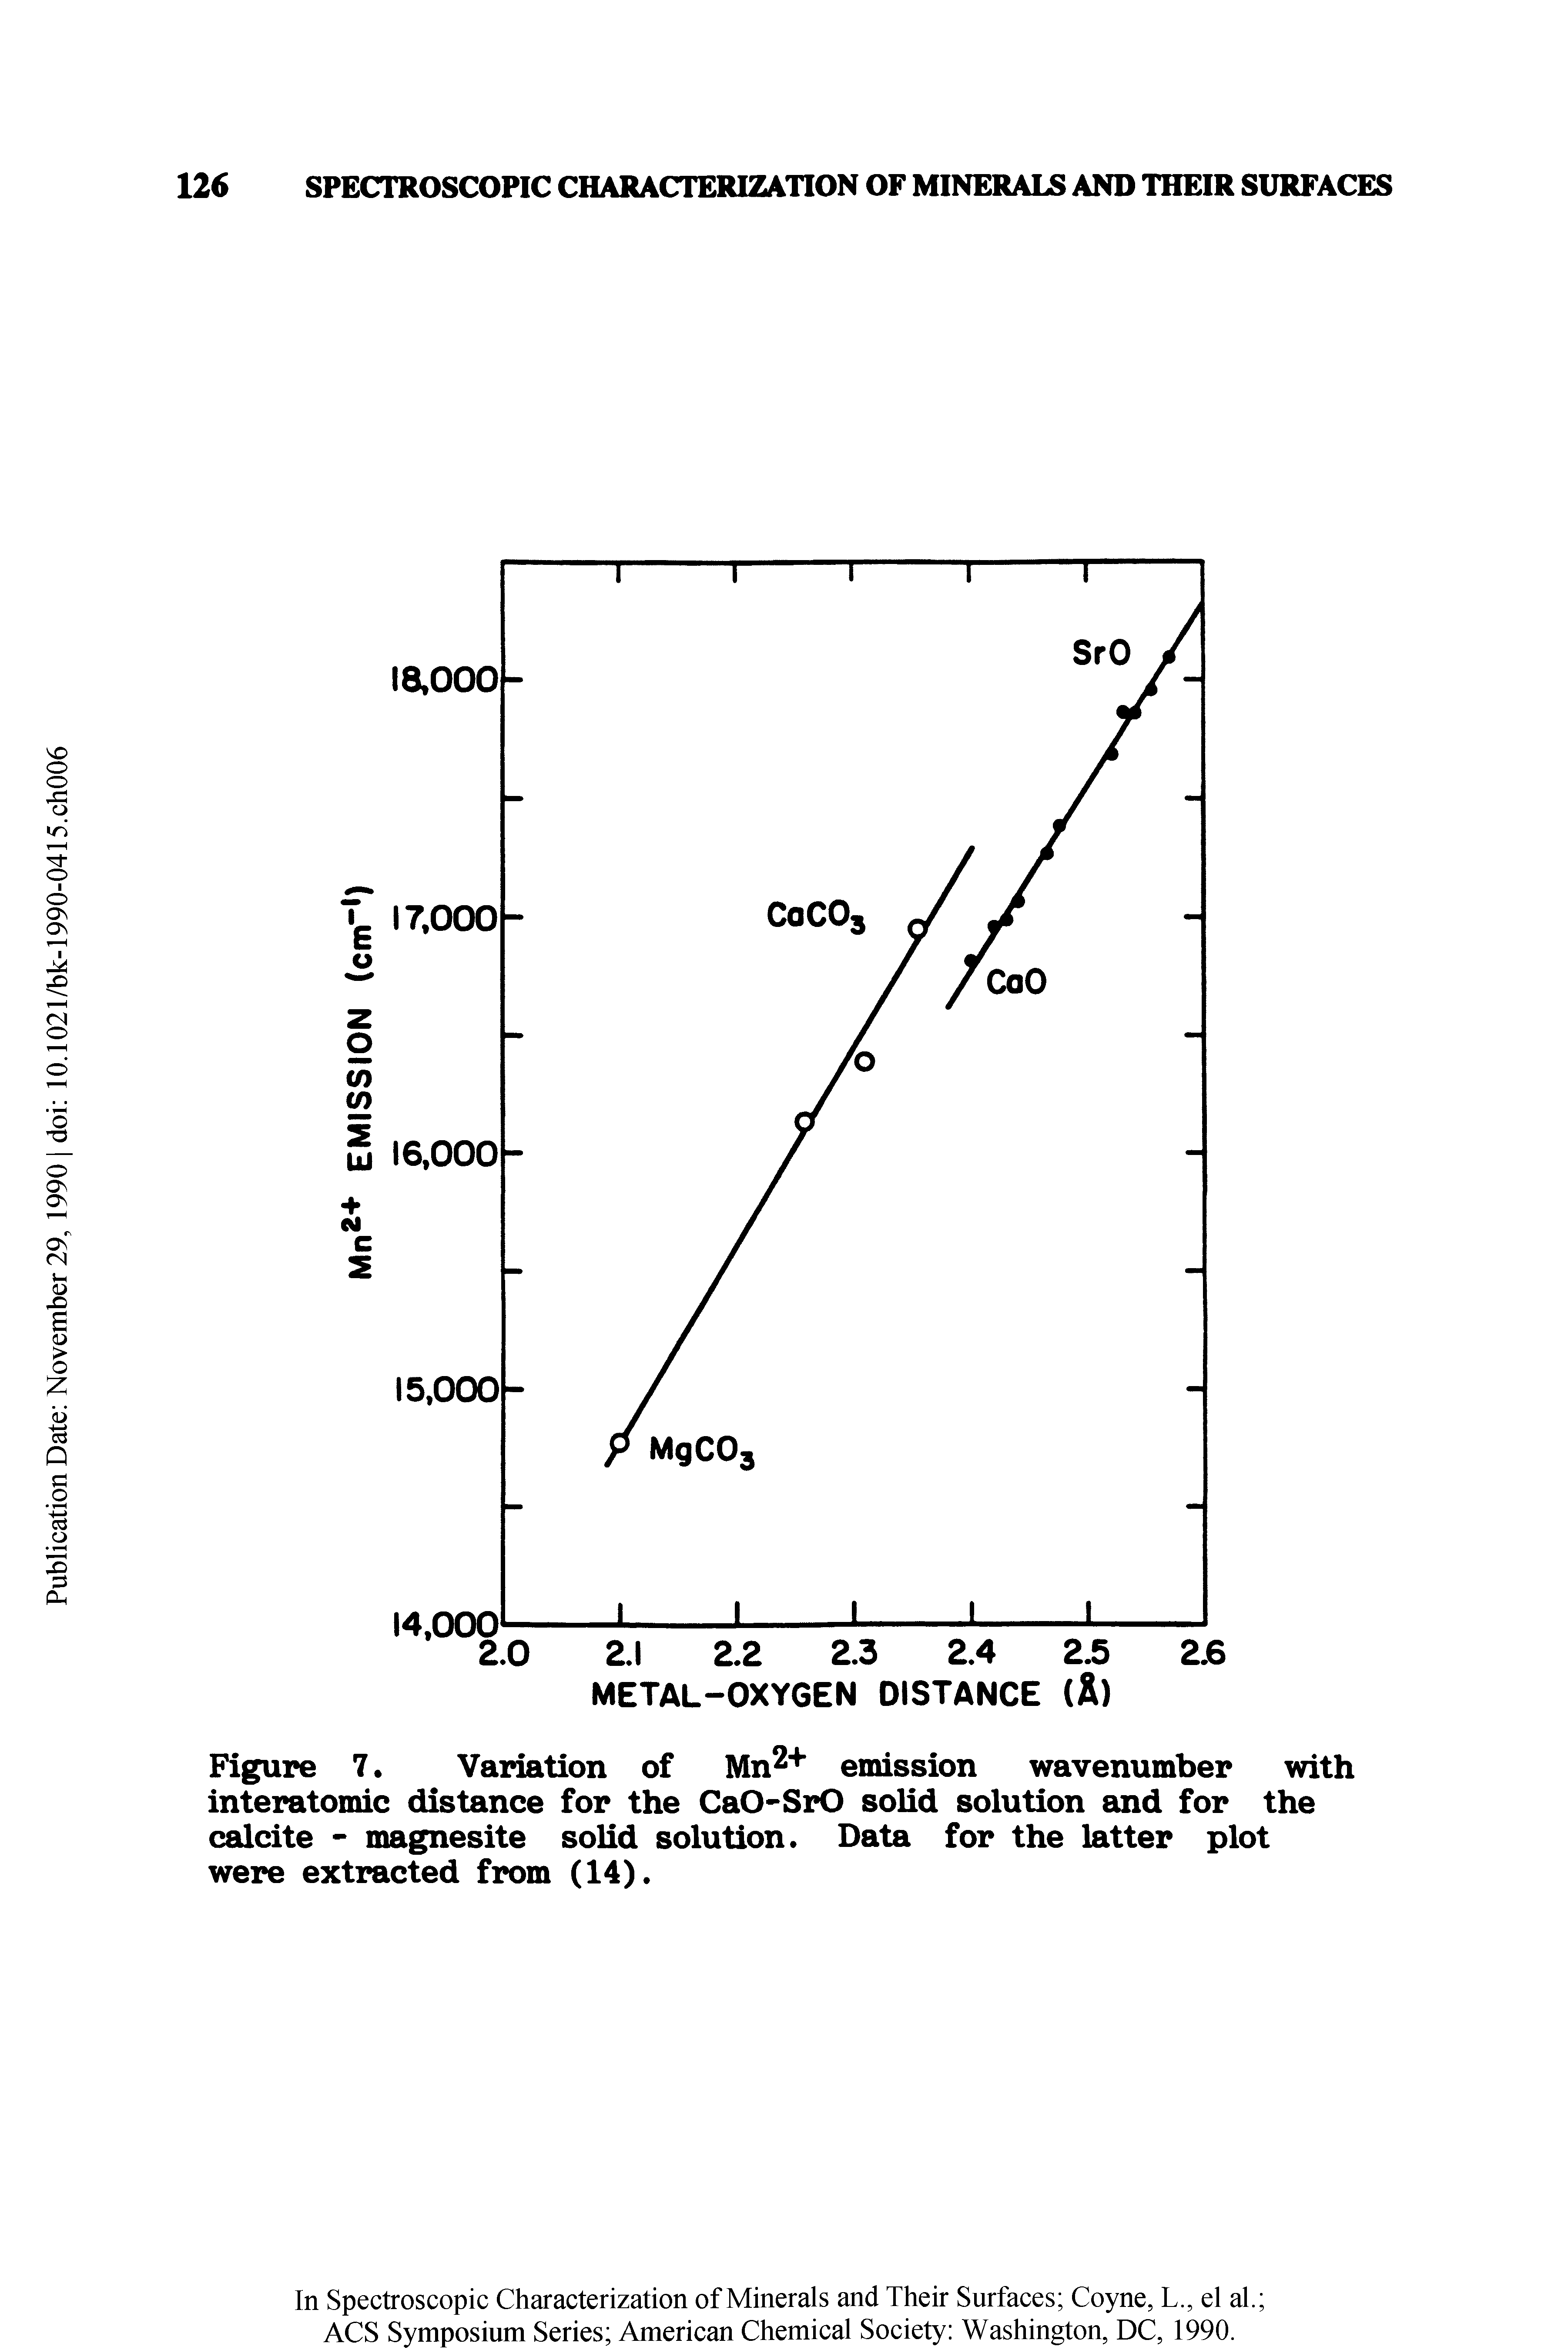 Figure 7. Variation of Mn2+ emission wavenumber with interatomic distance for the CaO-SrO solid solution and for the calcite - magnesite solid solution. Data for the latter plot were extracted from (14).